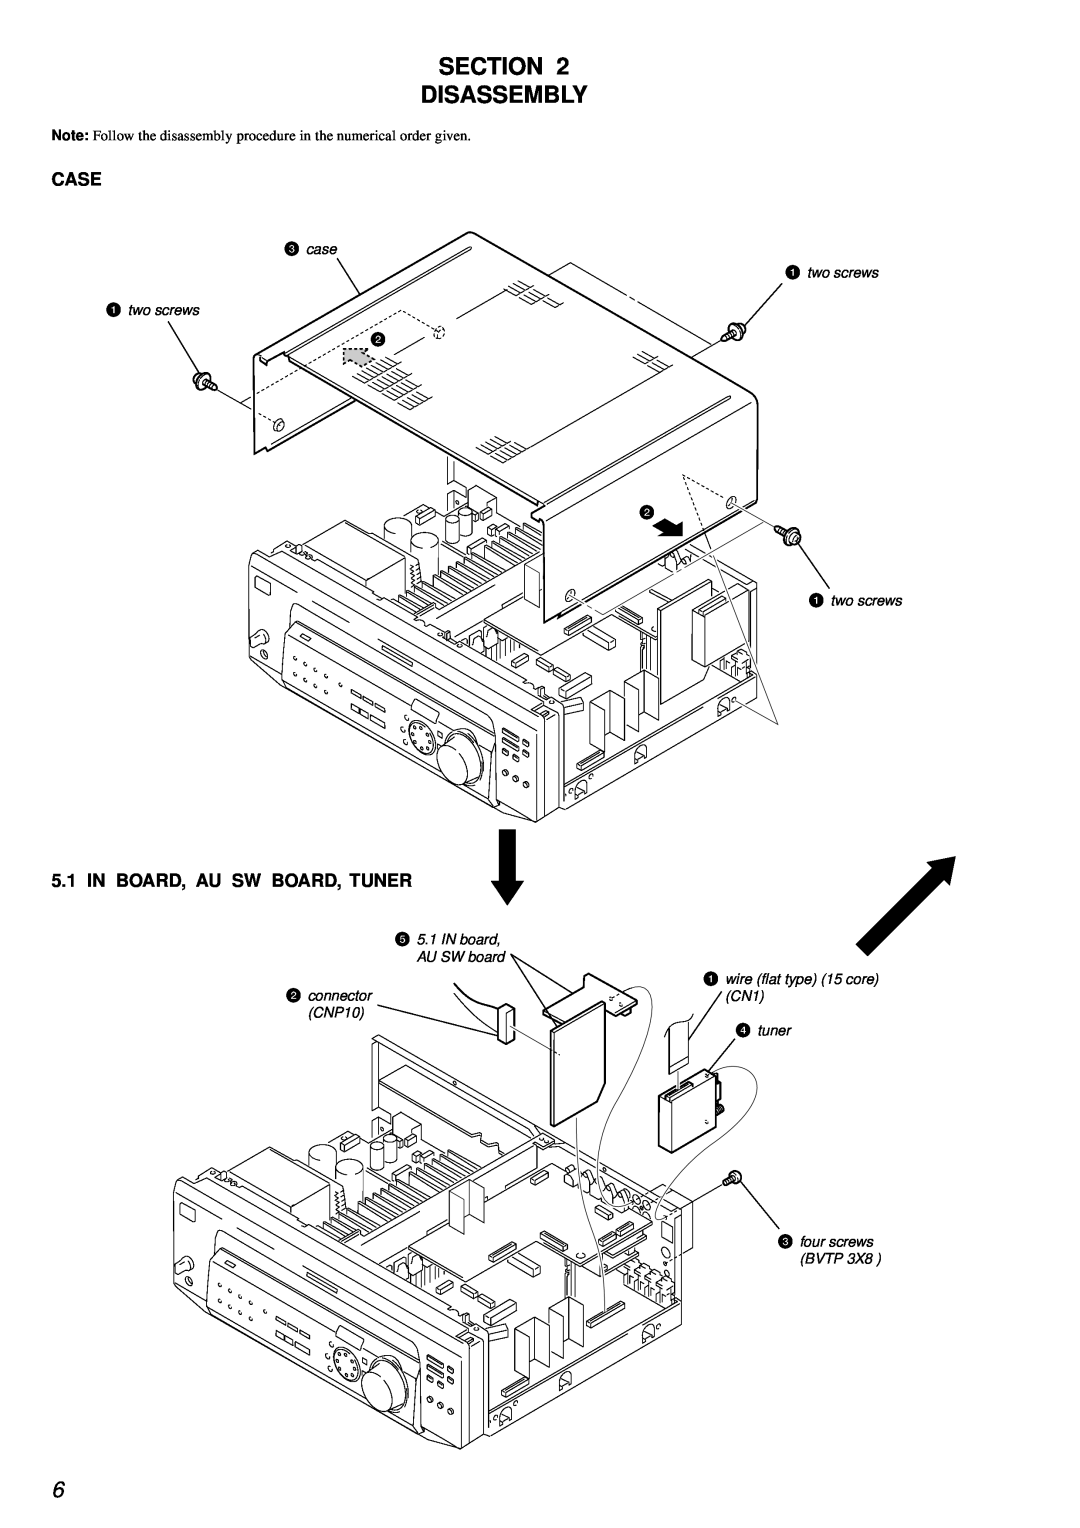 Sony STR-DE845 service manual Section Disassembly, Case, In Board, Au Sw Board, Tuner, 3case 1 two screws 1two screws 